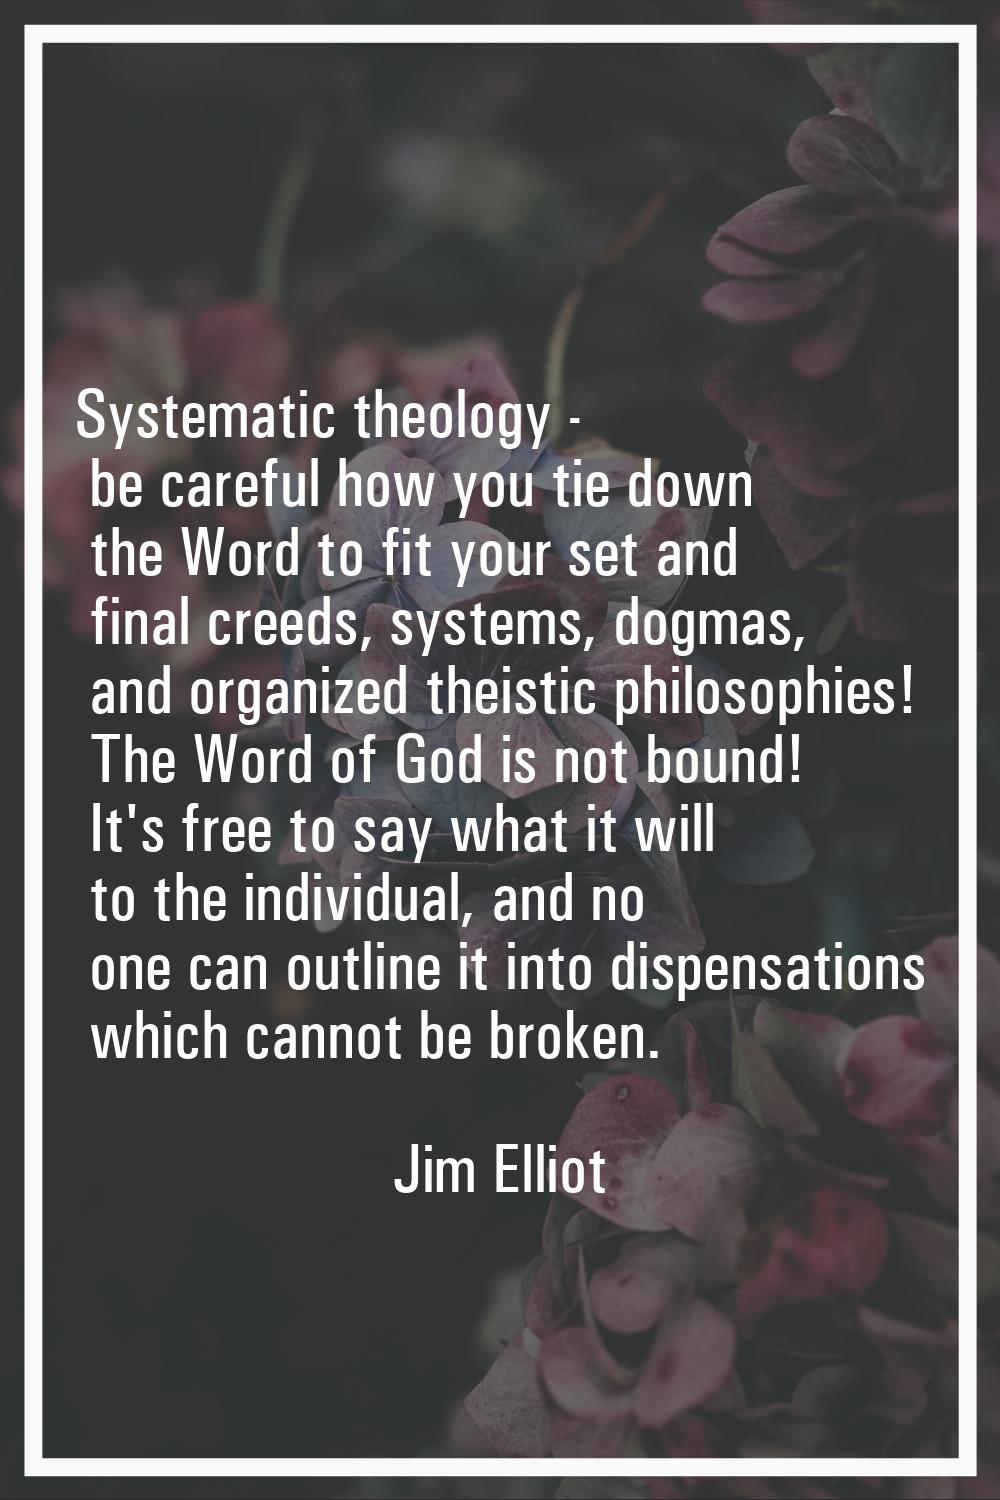 Systematic theology - be careful how you tie down the Word to fit your set and final creeds, system